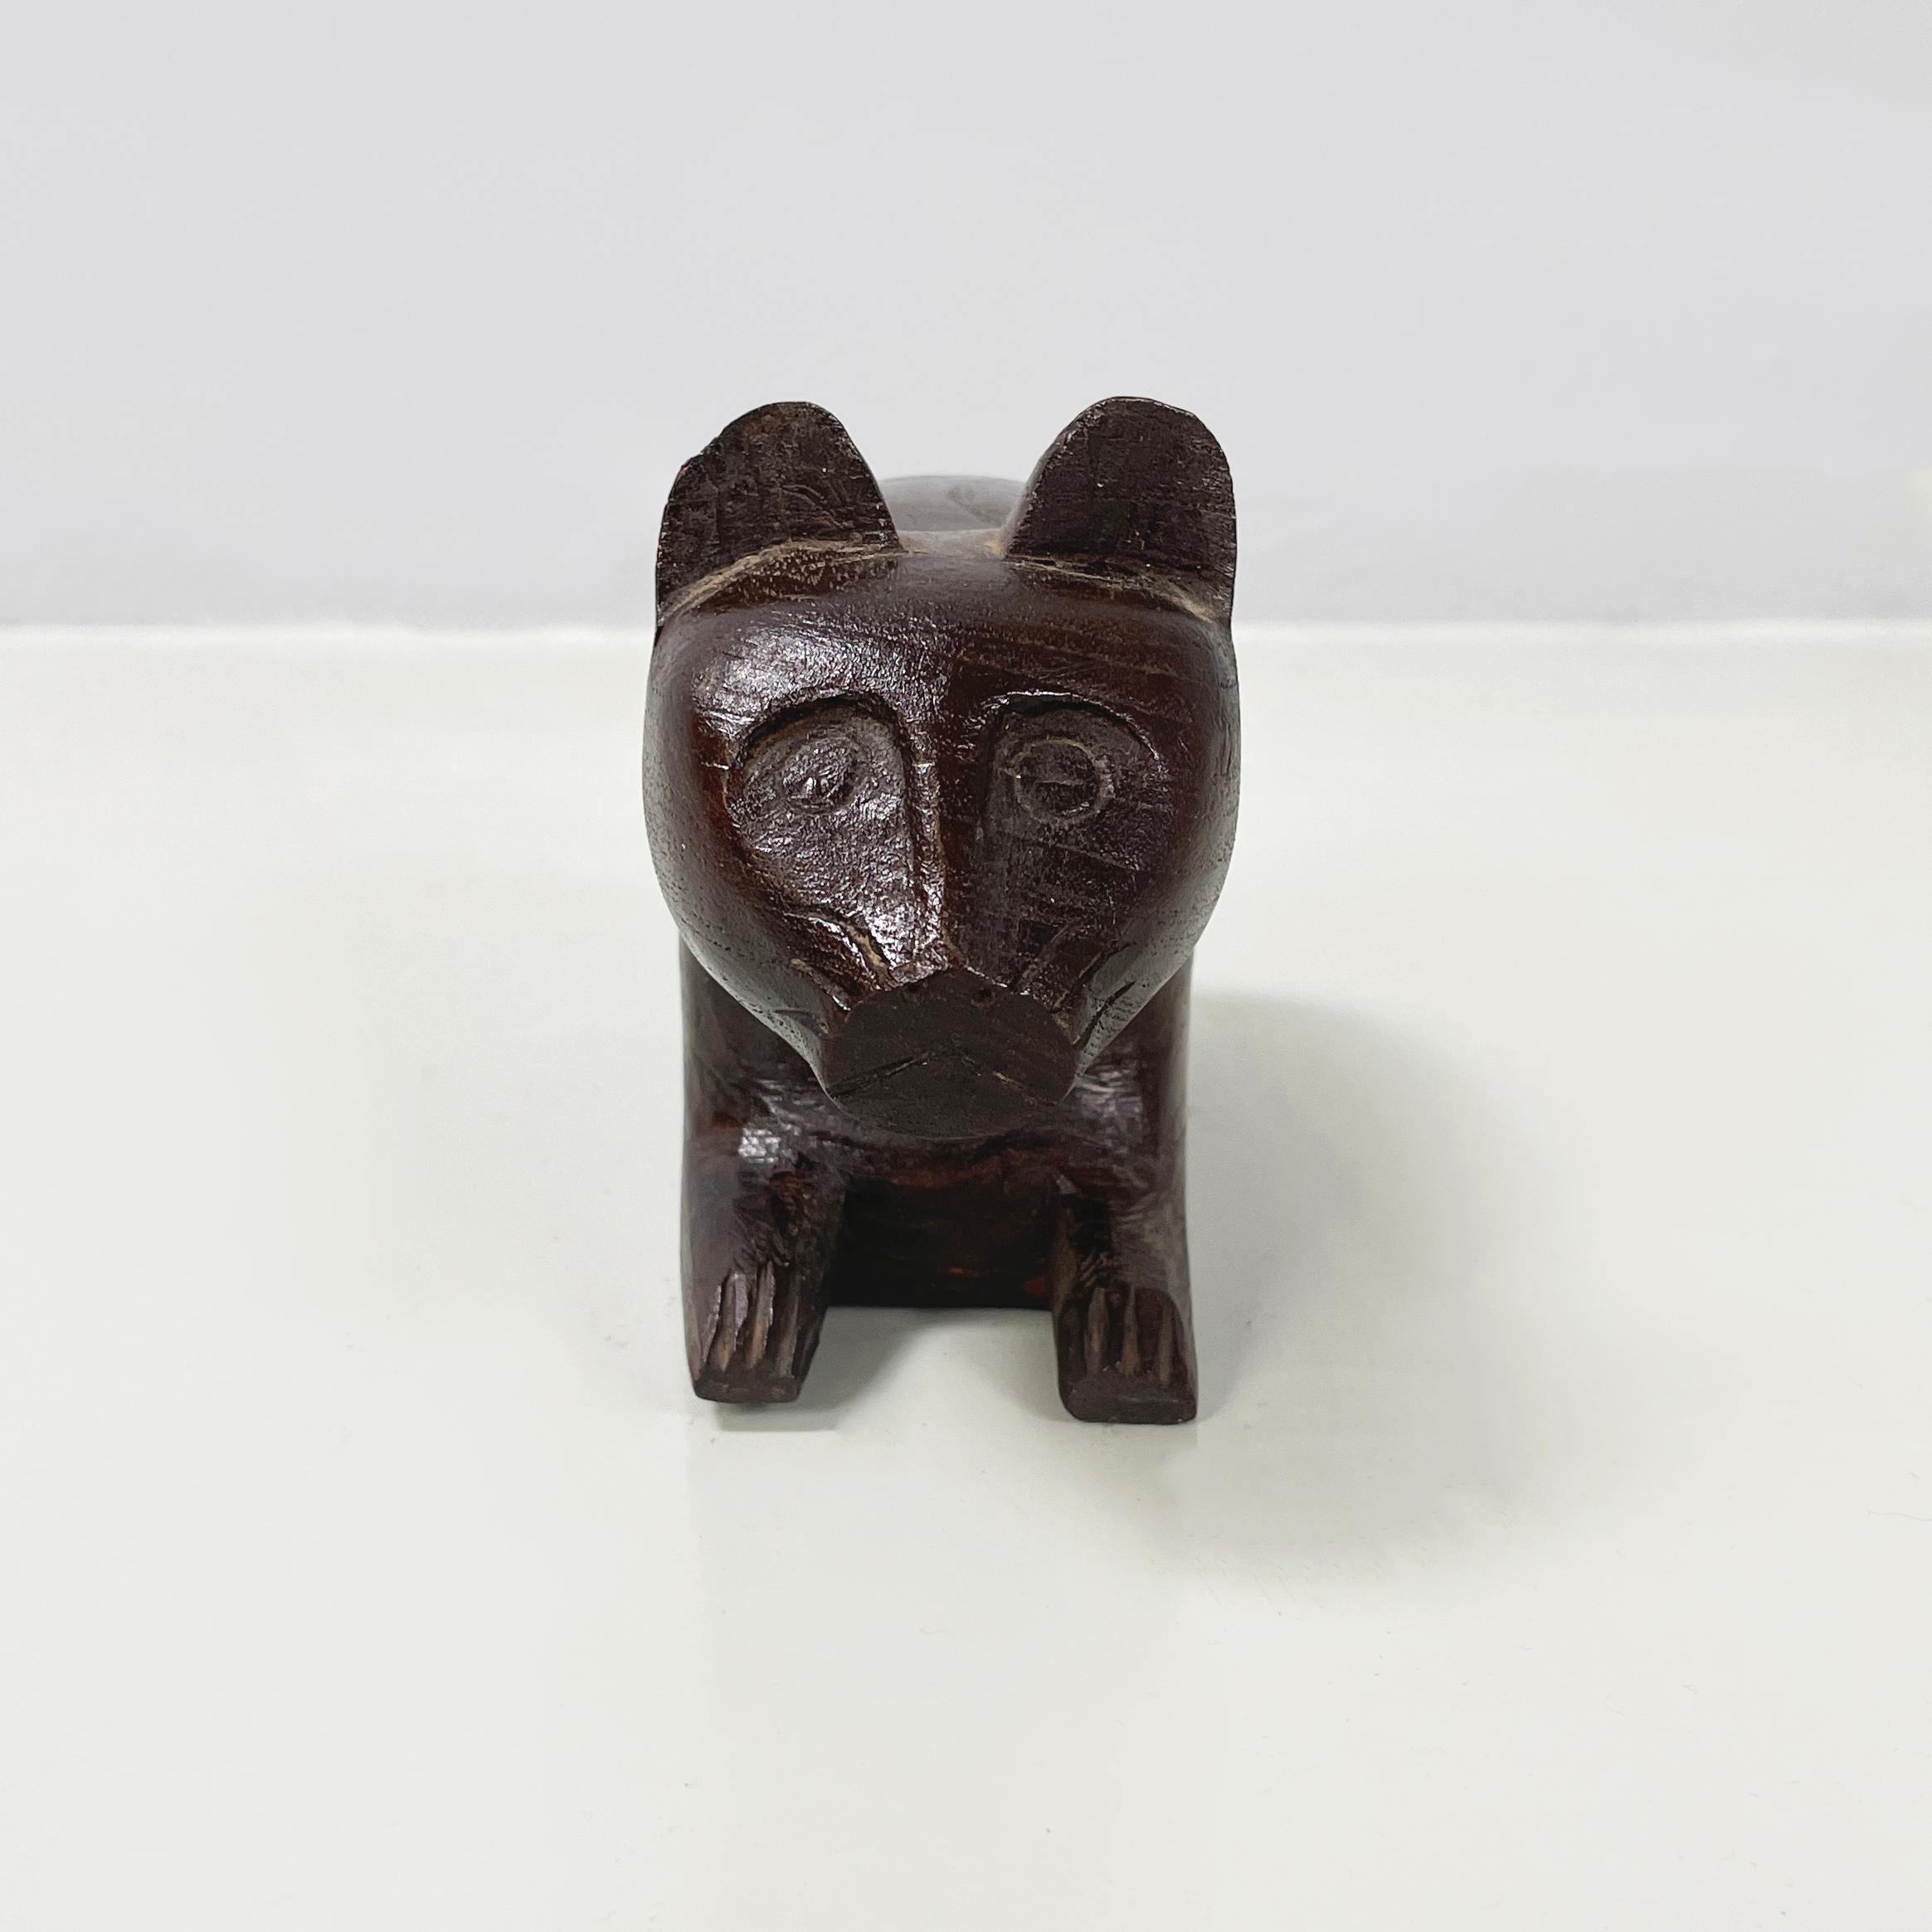 Chinese antique Wooden cat jewelry box or object holder, 1920s
Jewelry box with retractable compartment in the shape of a lying cat, entirely made of wood. The cat's features are stylized. The sliding compartment is on the cat's belly. When closed,